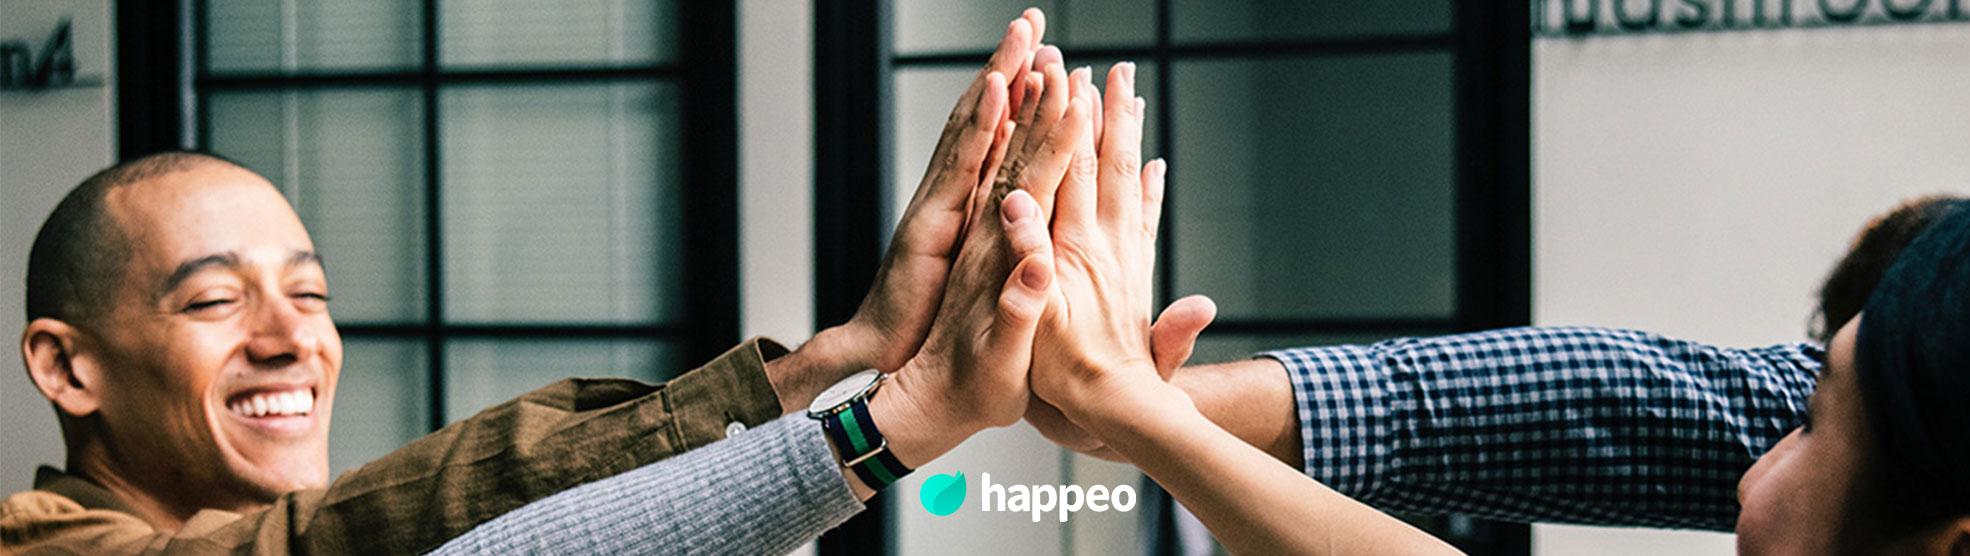 Review Happeo: Your unified digital workplace - Appvizer